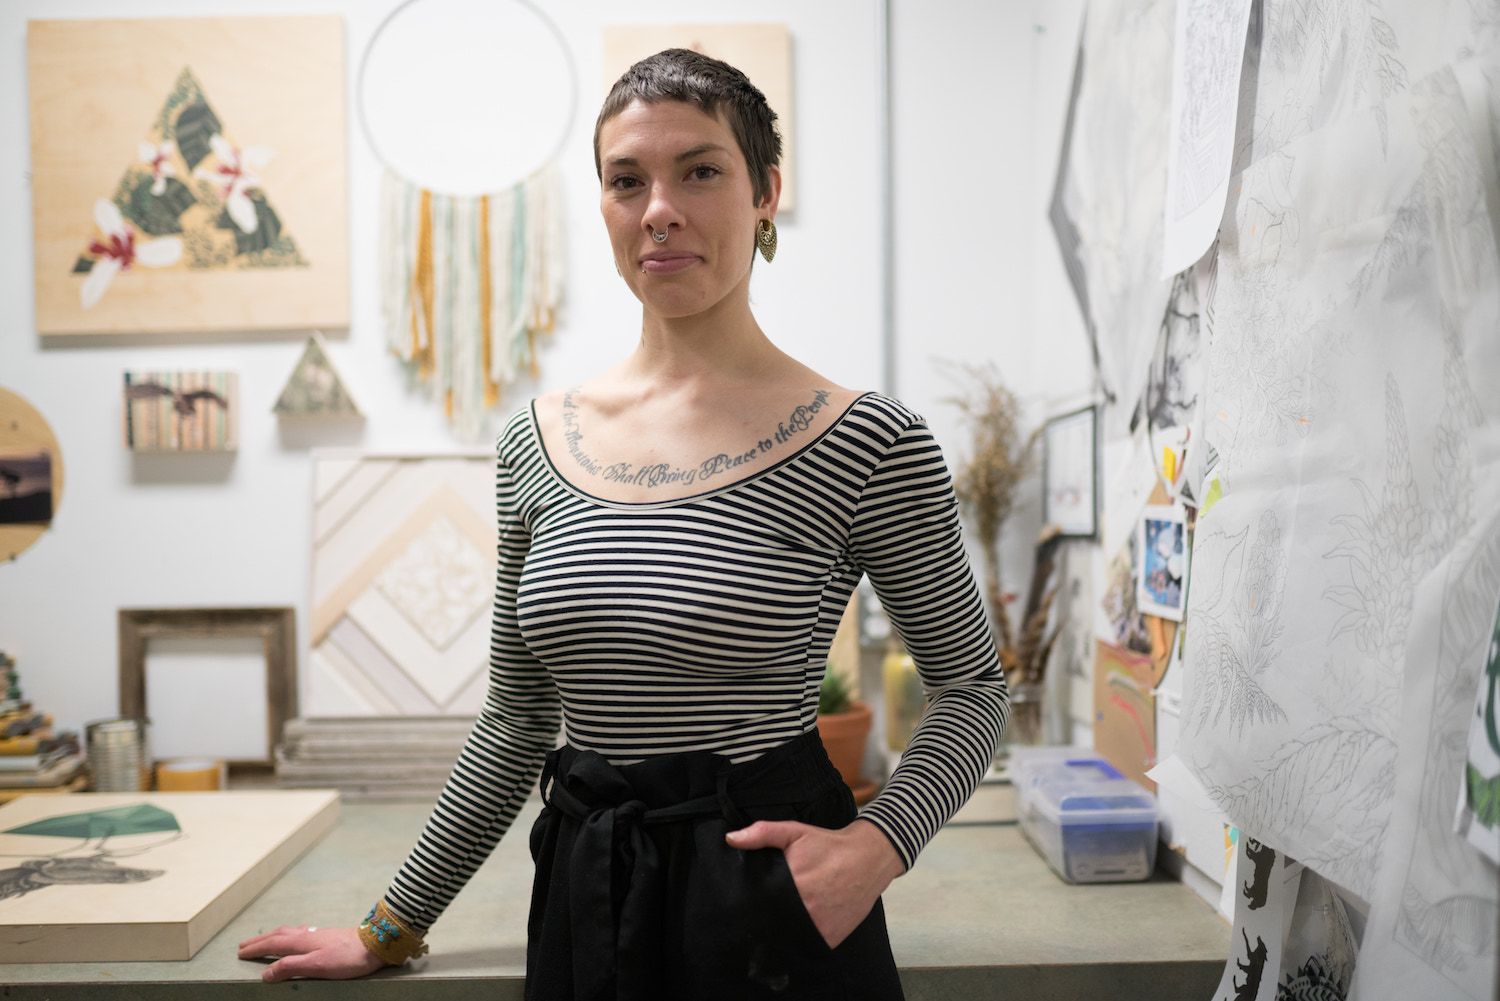 A portrait of artist Caitlin Bodewitz standing in her studio, wearing a striped shirt and black pants, with close cropped black hair.